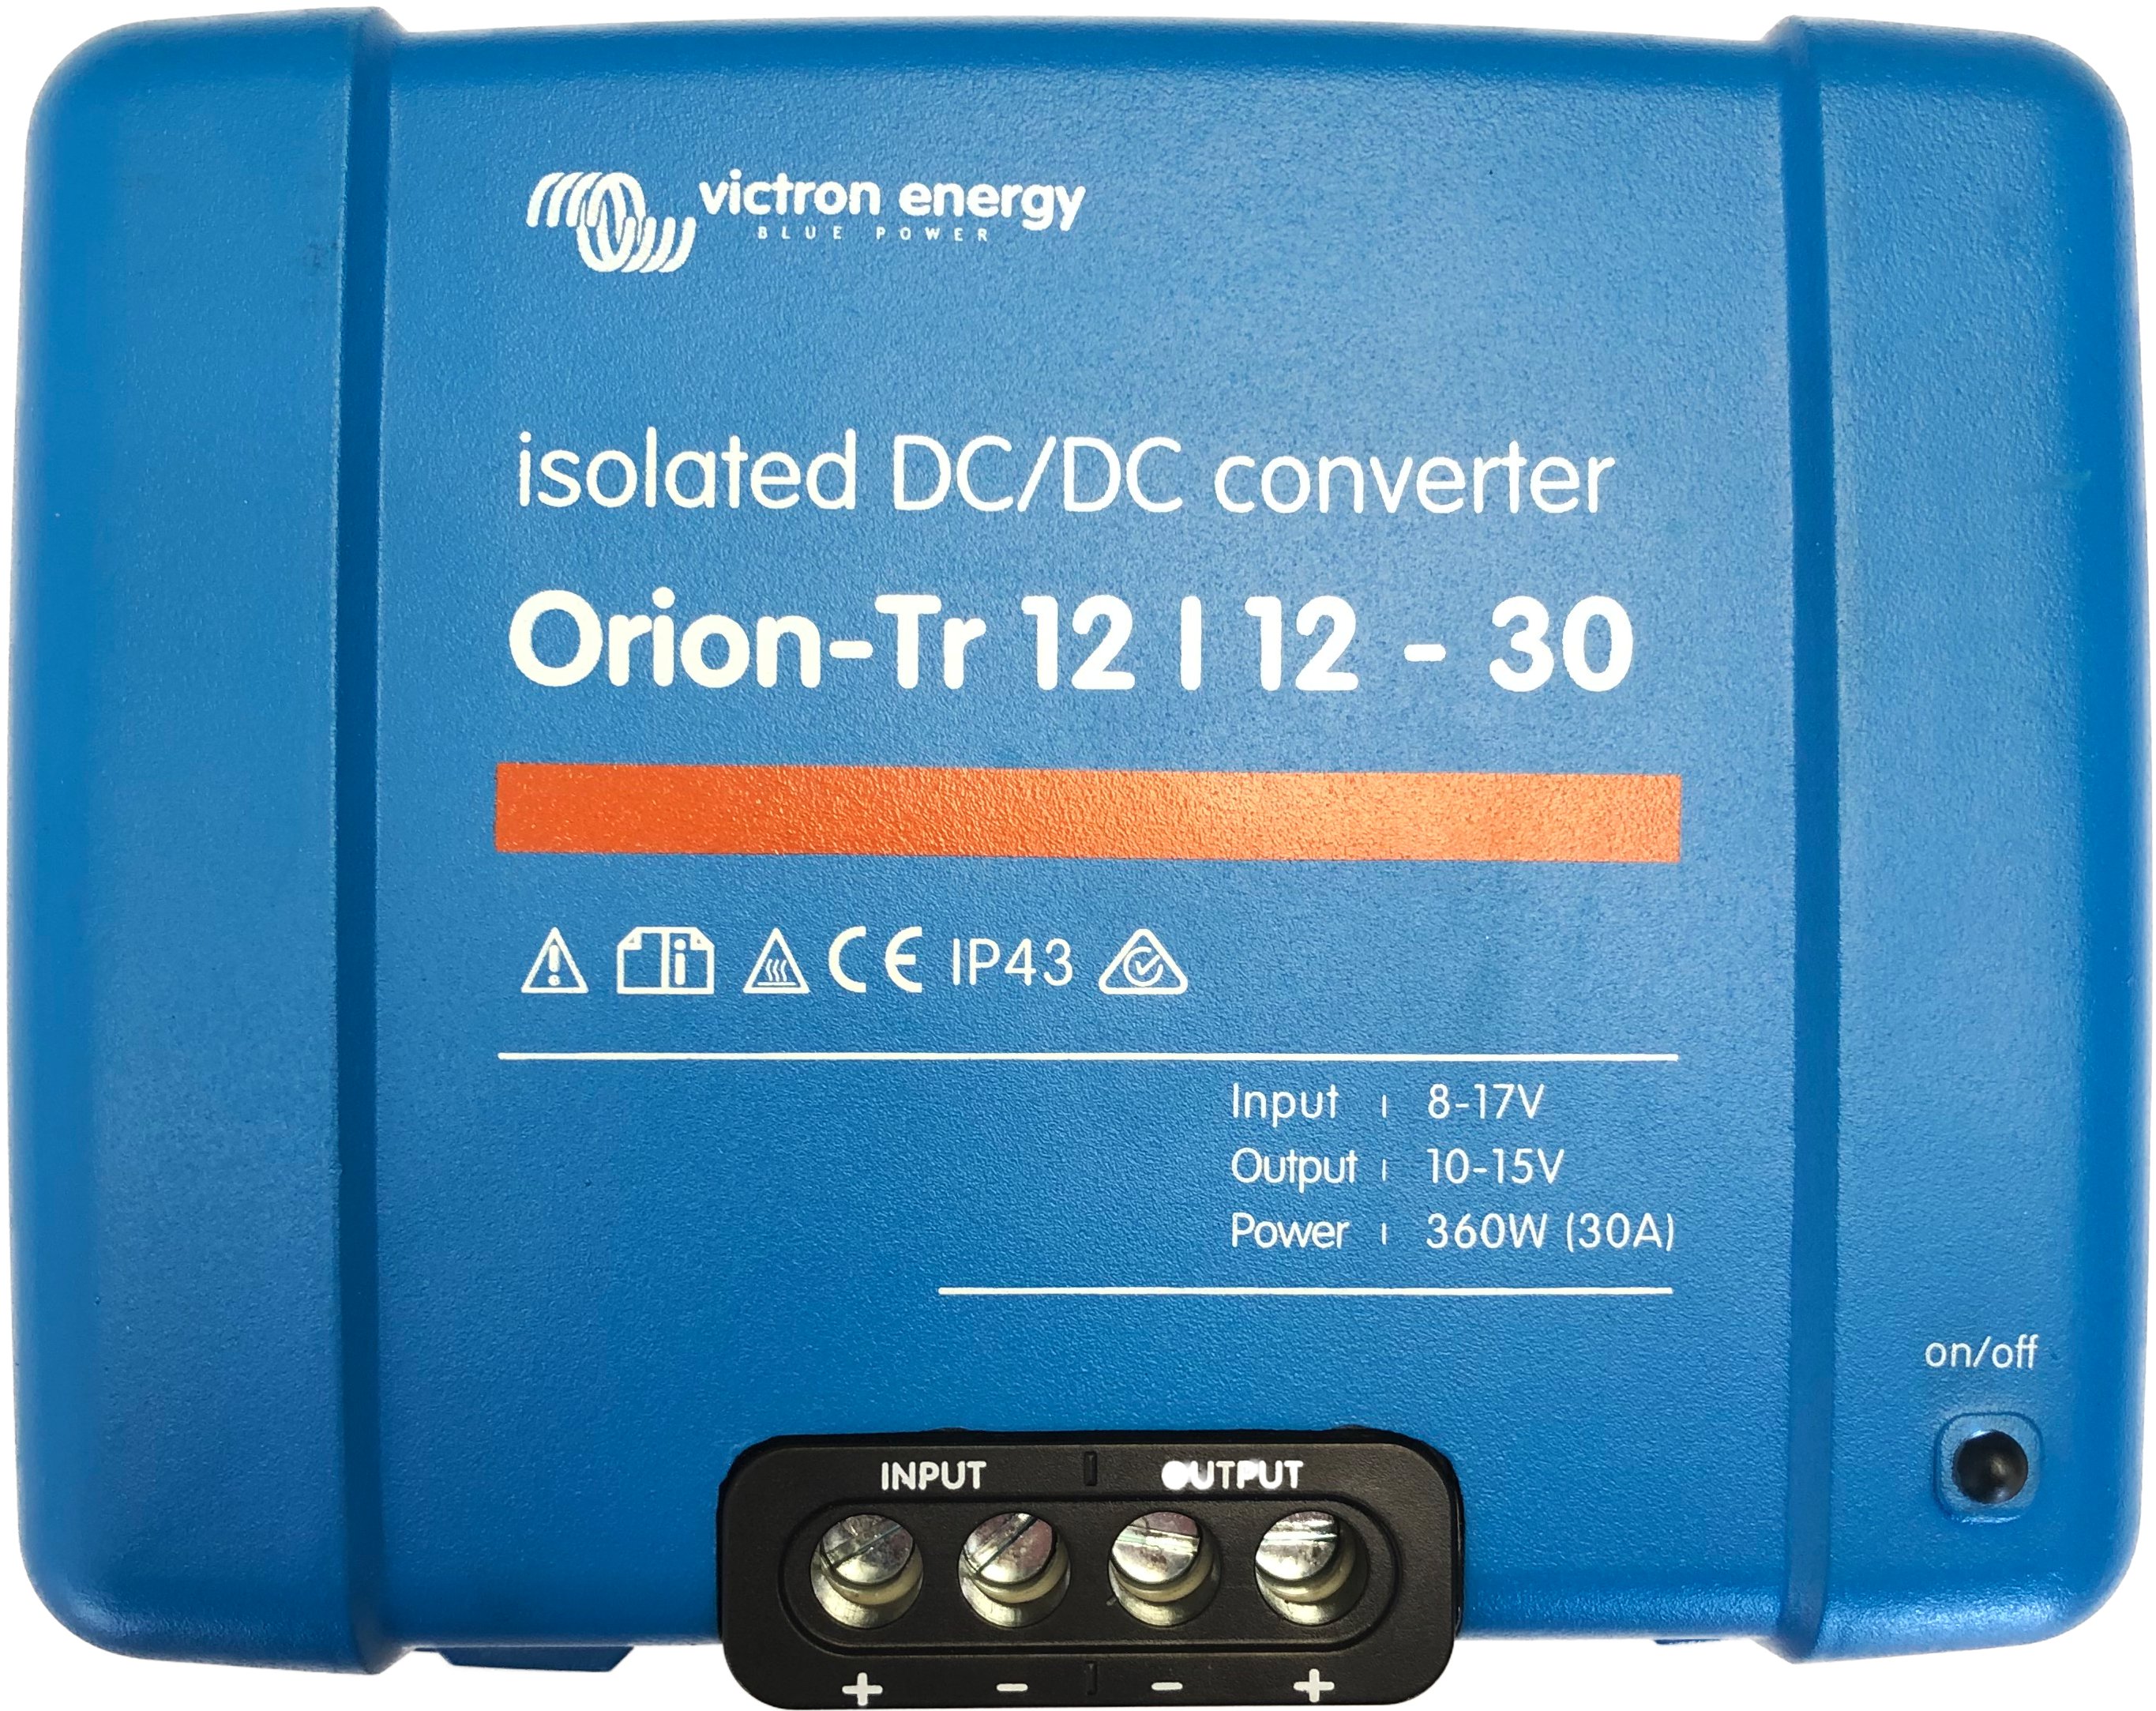 Does the non-isolated DC-DC converter shut off with the engine to save battery?